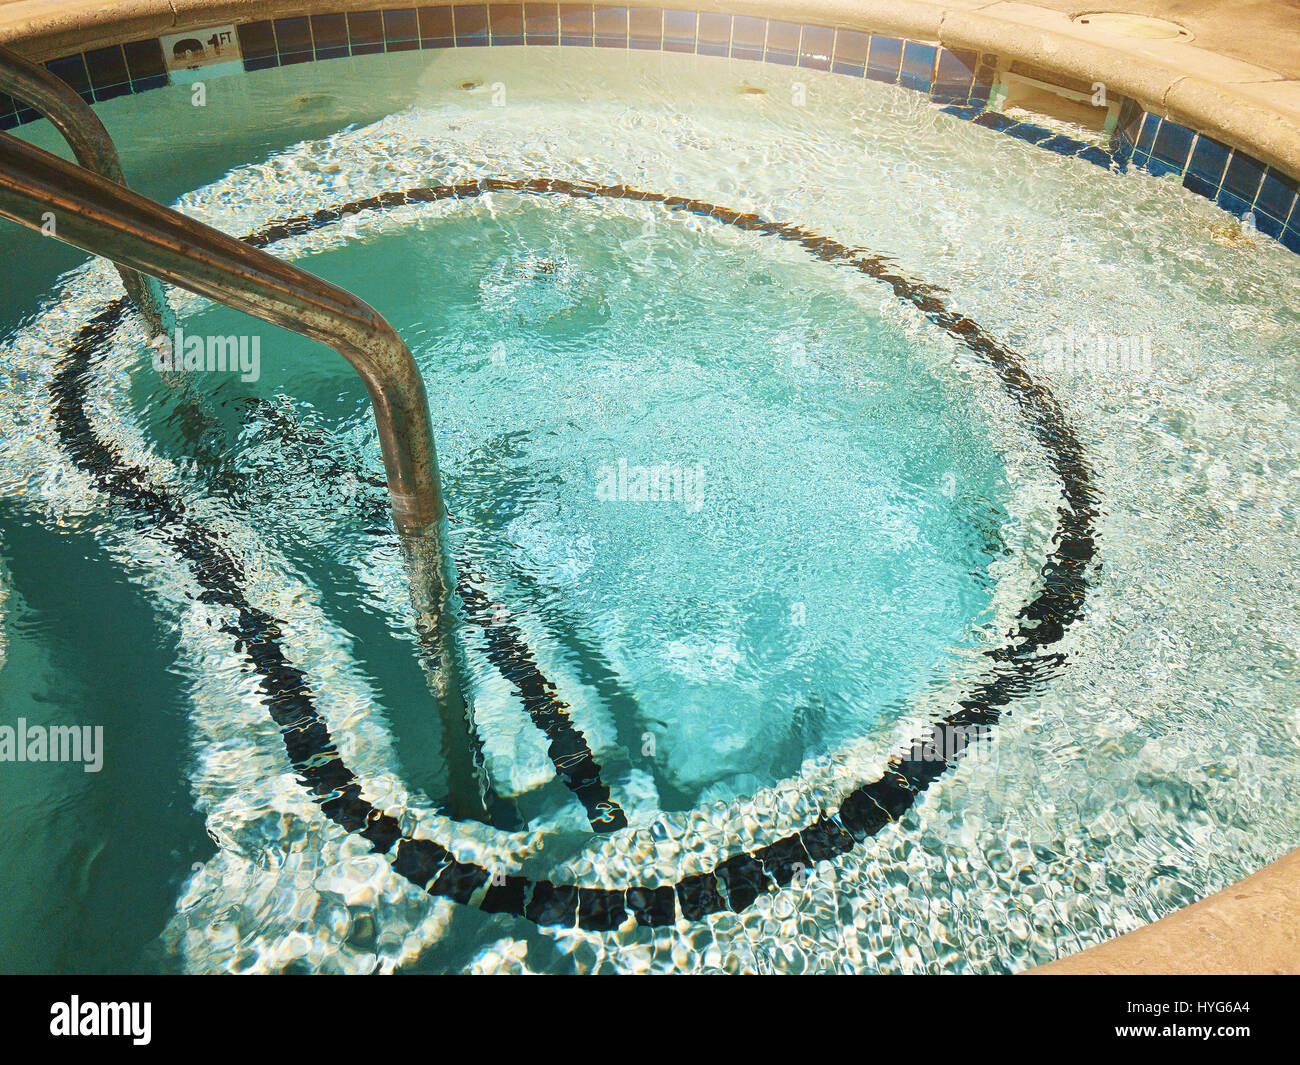 Outdoor Jacuzzi Pool with Fresh Blue Water for Massage and Spa Stock Photo